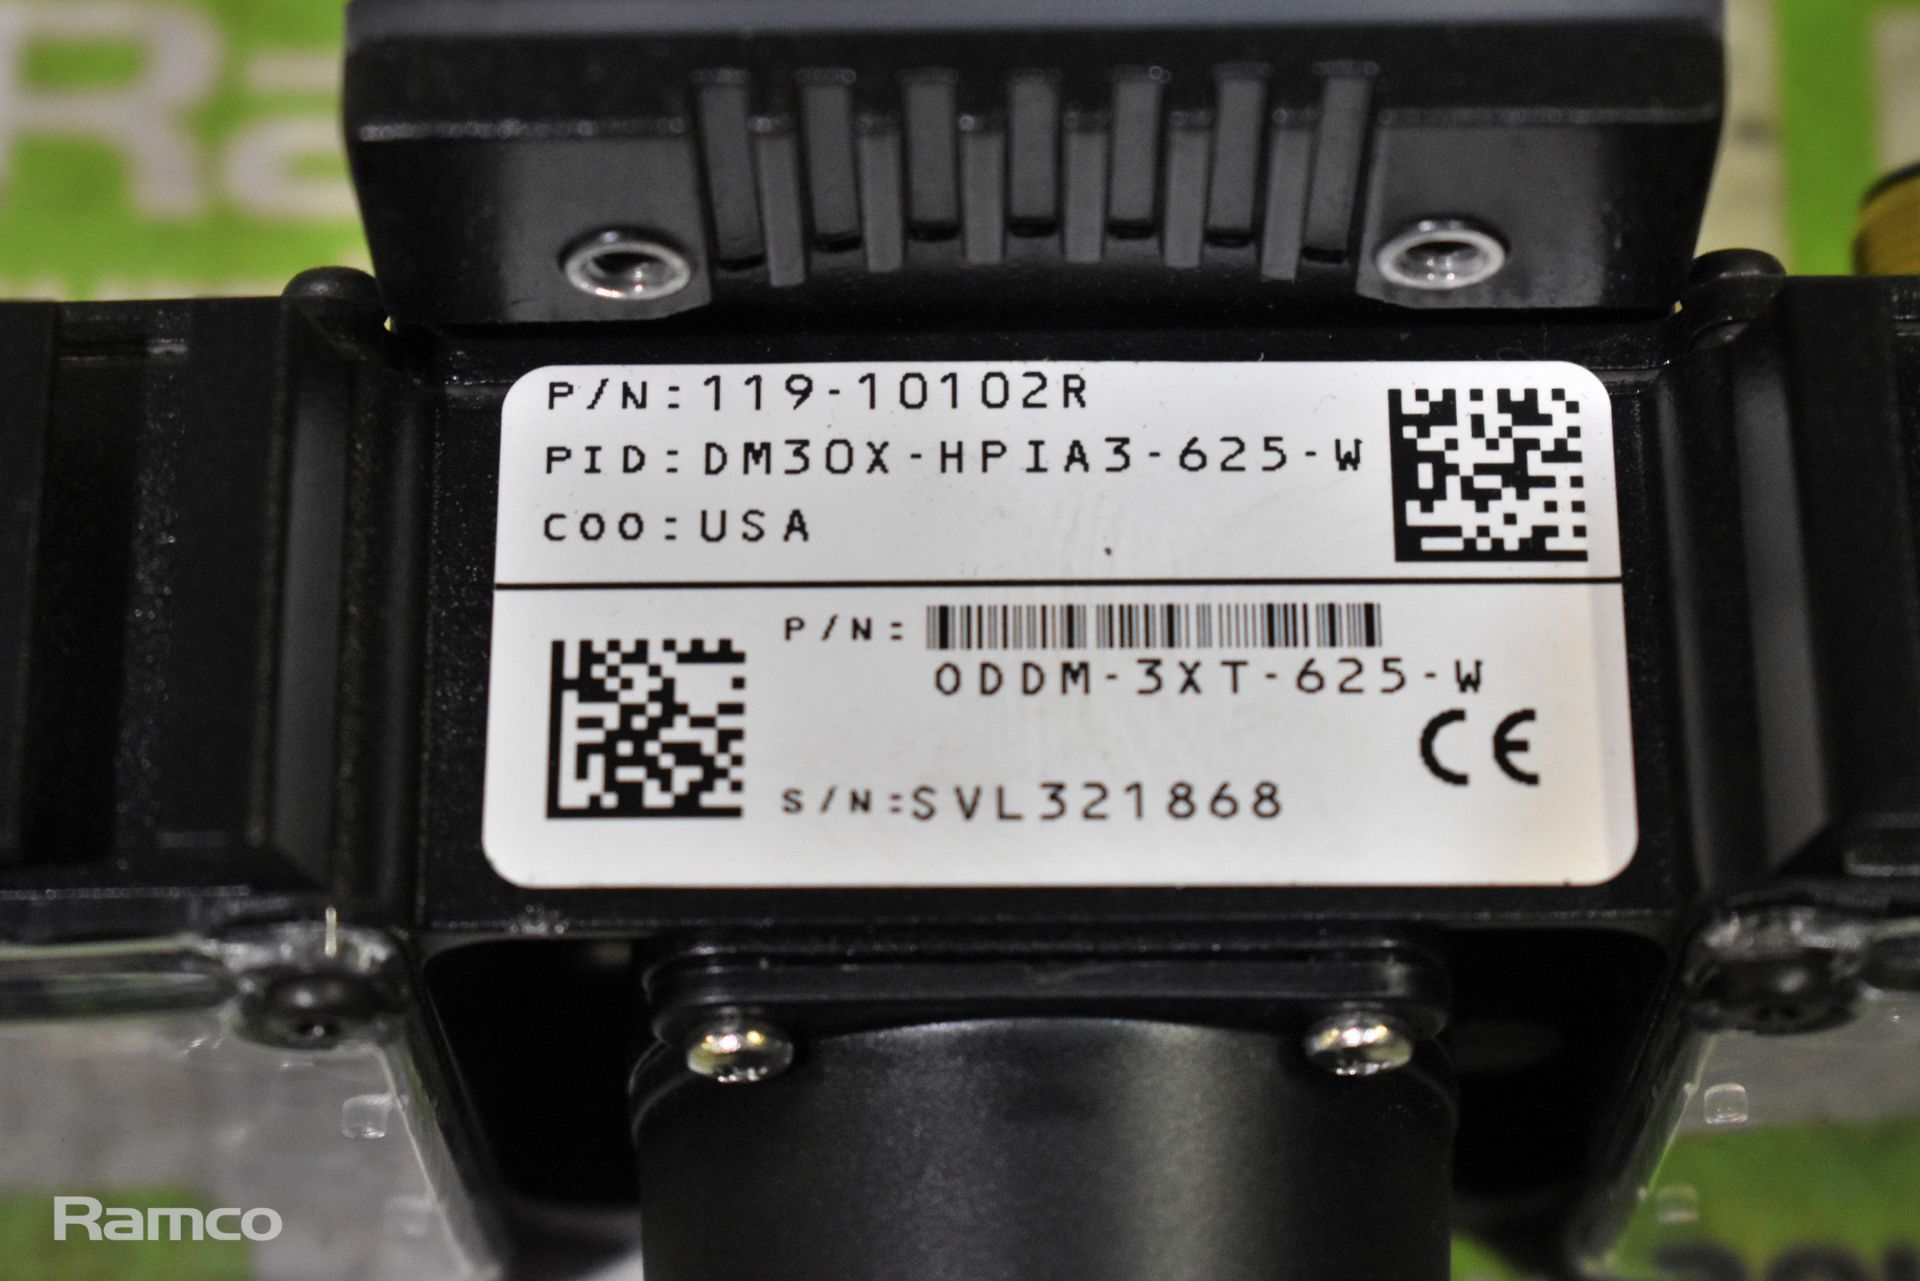 2x Cognex DM475X-M barcode readers - Image 5 of 8